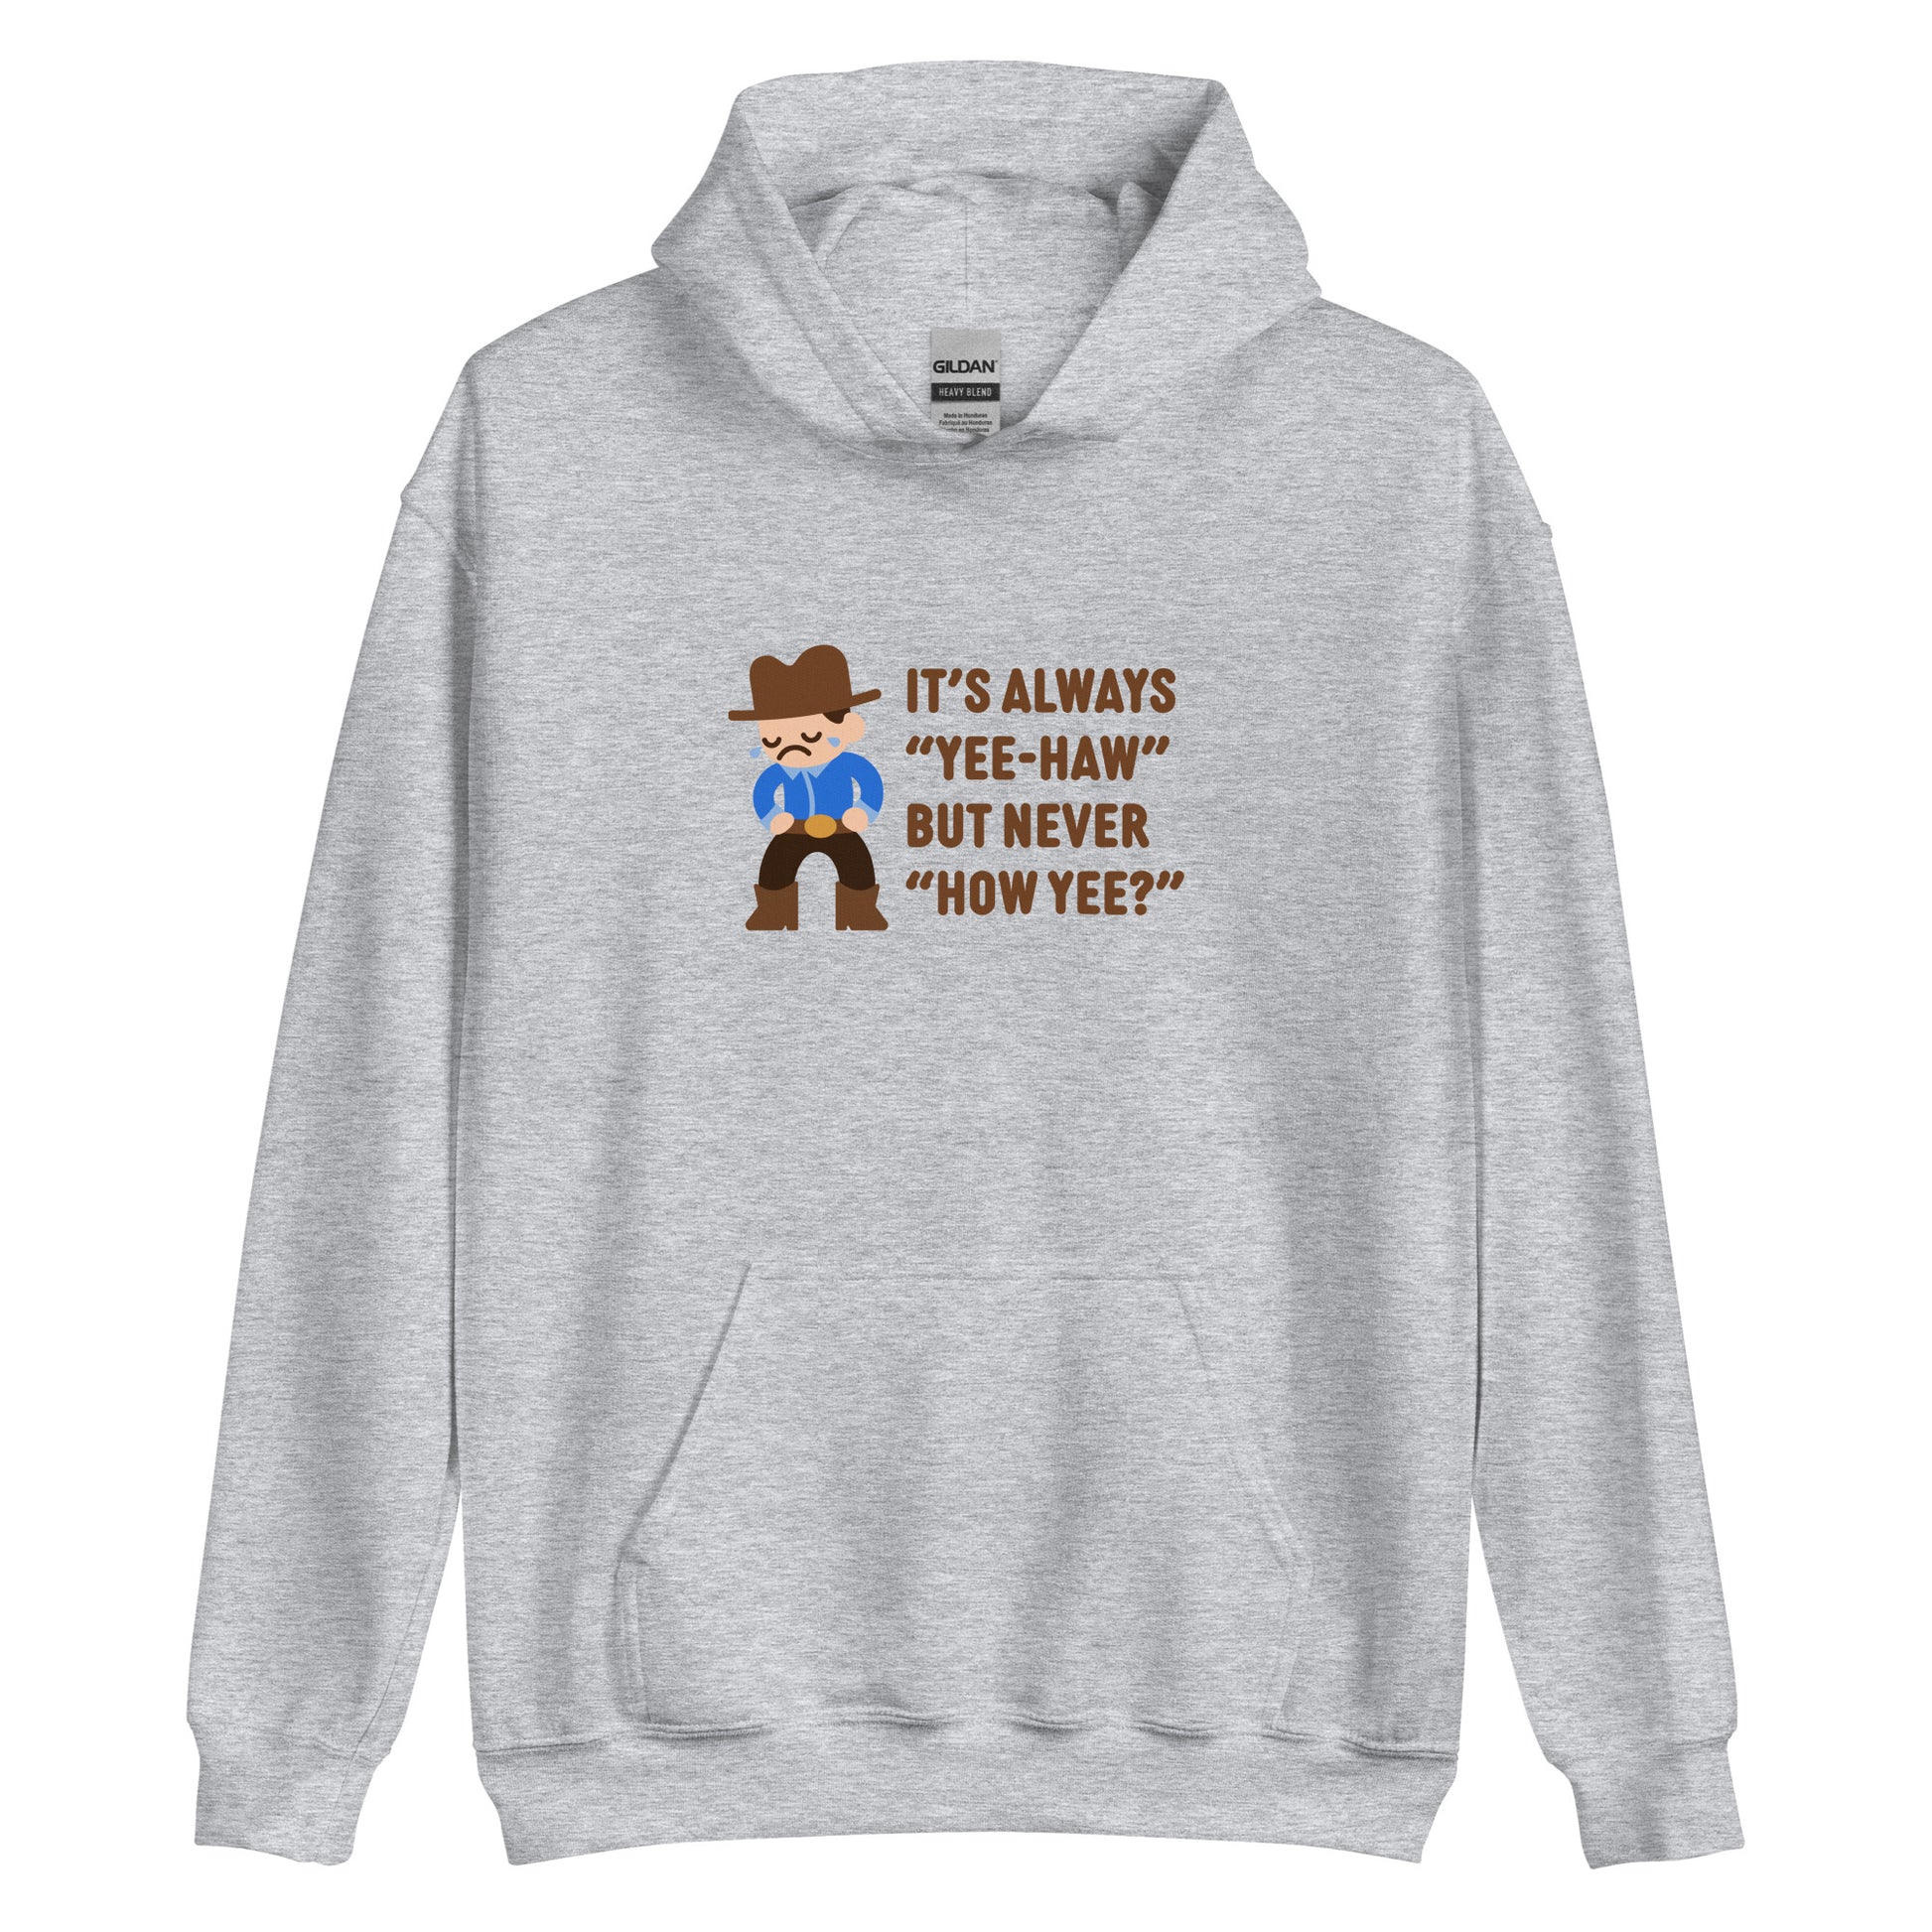 A gray hooded sweatshirt featuring an illustration of a crying cowboy wearing a blue shirt. Text alongside the cowboy reads "It's always "yee-haw" but never "How yee?""